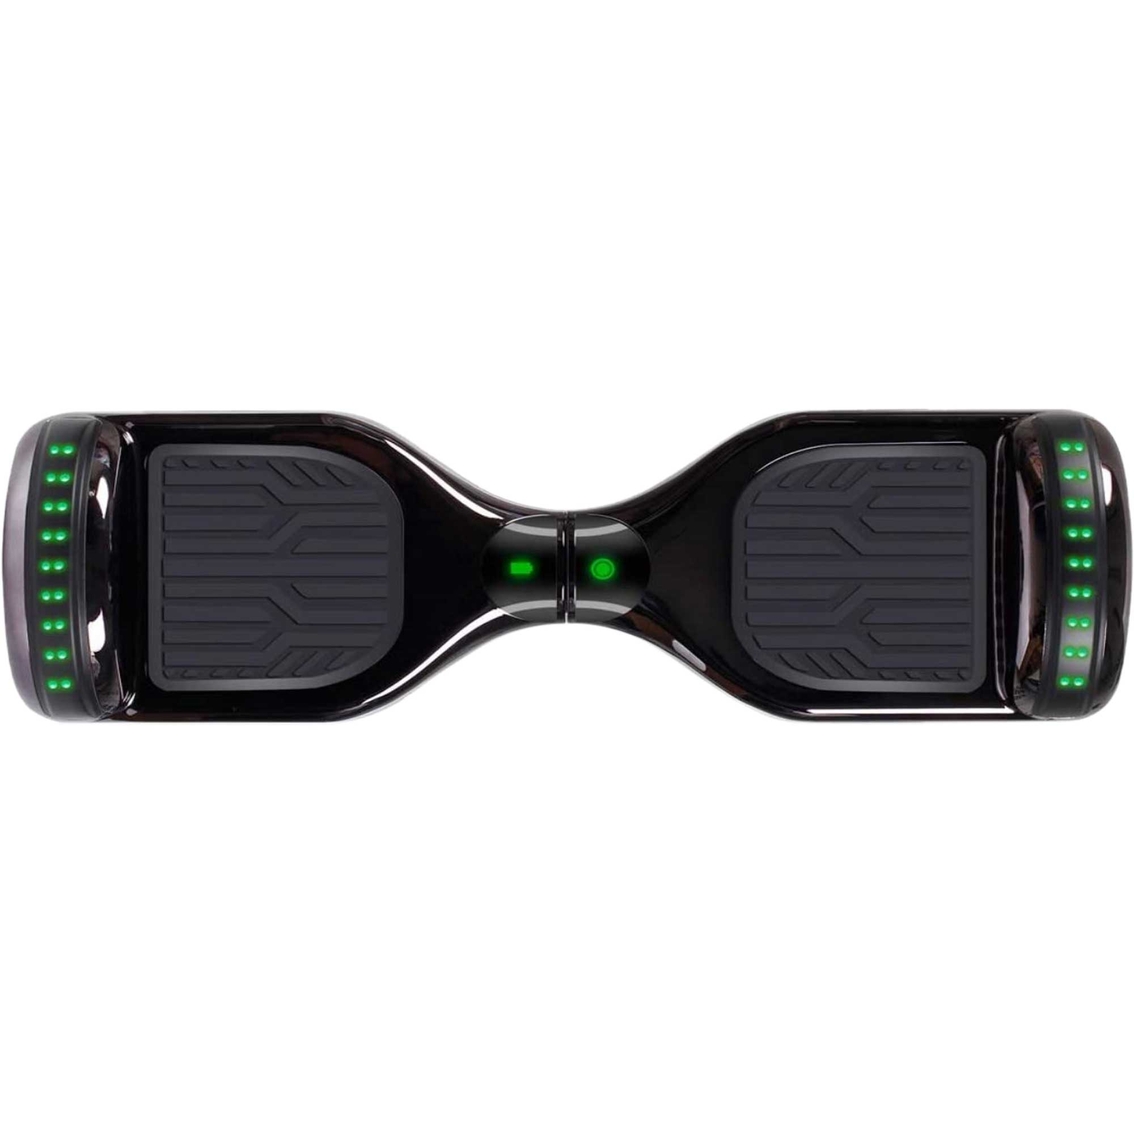 GlareWheel Hoverboard with Bluetooth Speaker and Light Up Wheels - Image 5 of 6